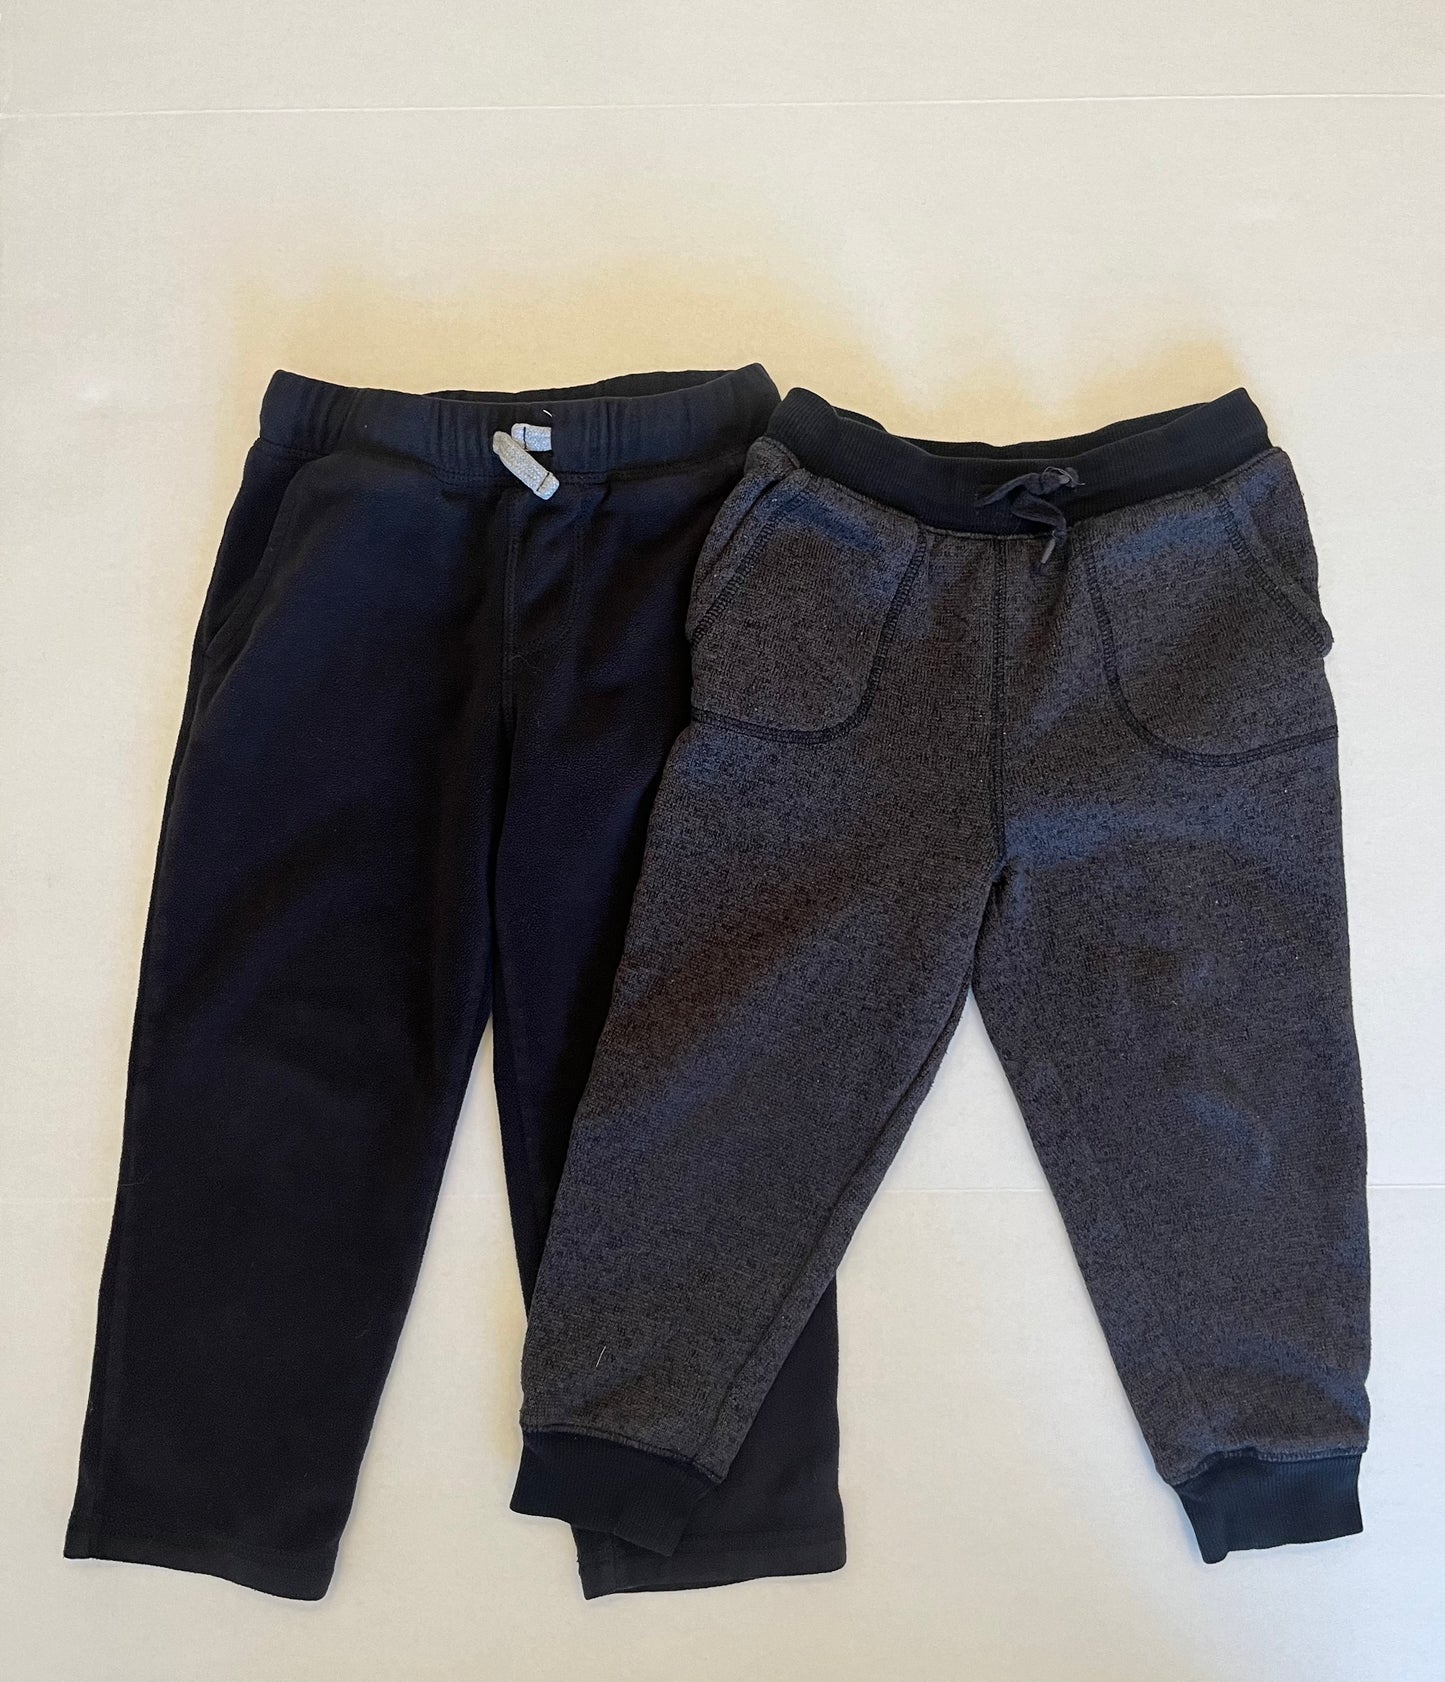 Carter’s (black) and Jumping beans (heather black) pants. Boys size 4T PPU Mariemont